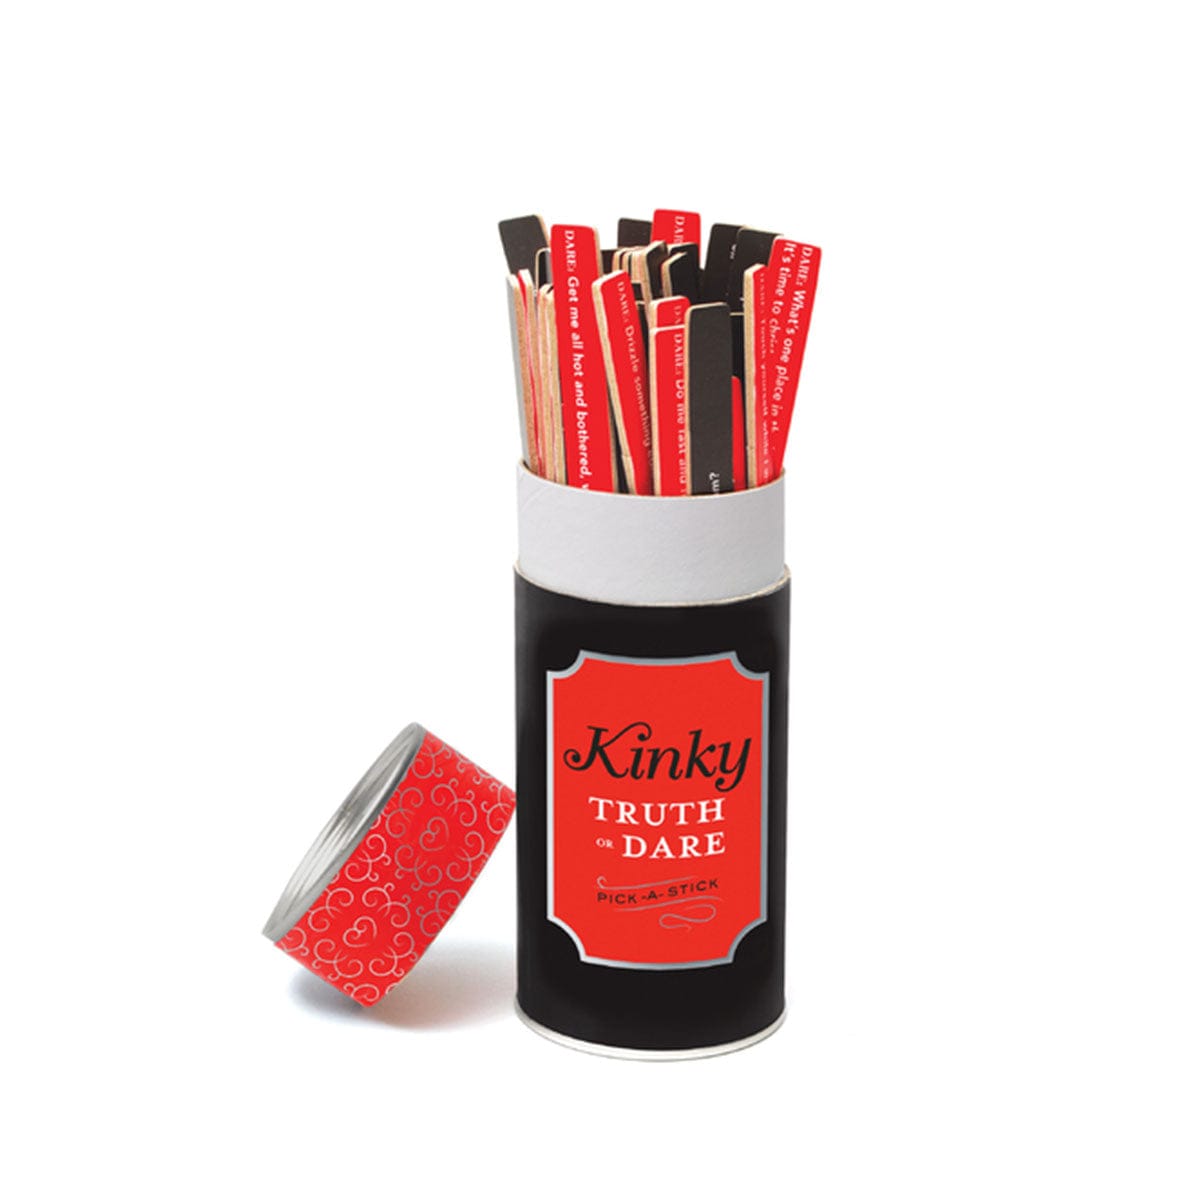 Kinky Truth or Dare Pick a Stick by Chronicle Books - rolik